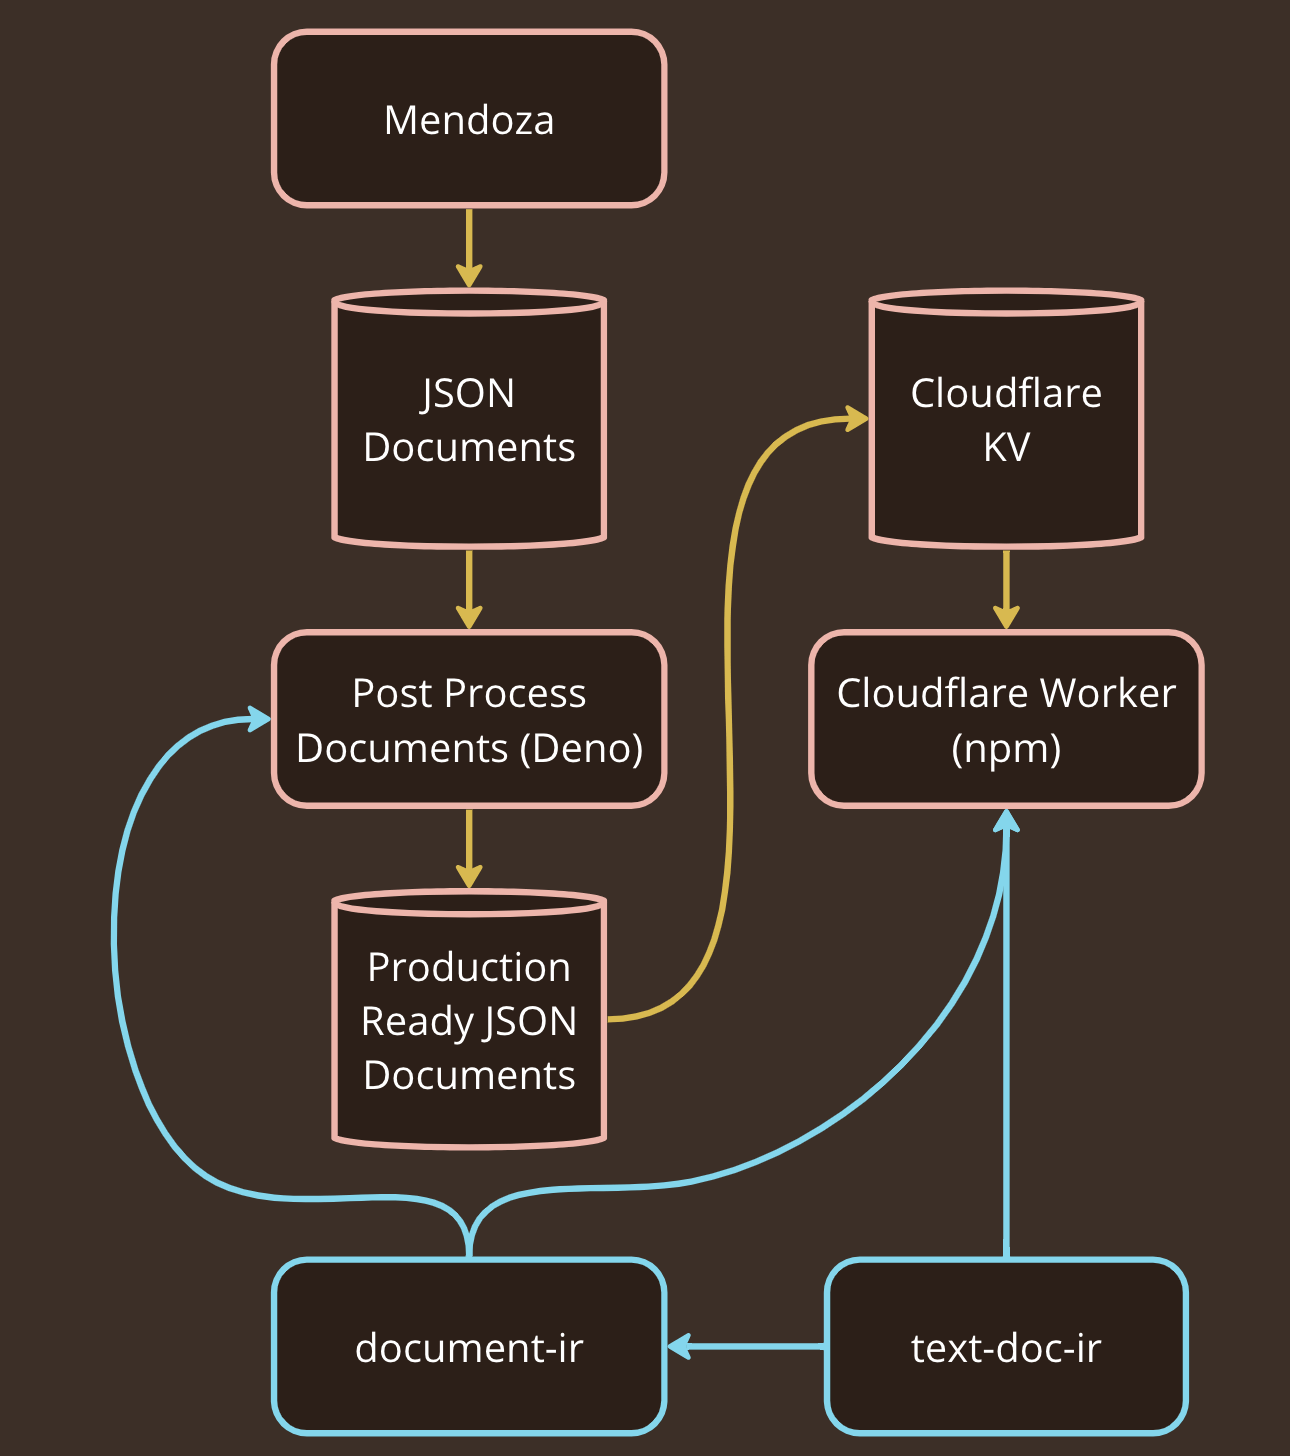 A flow graph where Mendoza (the static site generator) produces JSON documents which are processed by a post processing application. That application is a deno kind and uses document-ir. The results are labeled production ready and go into Cloudflare KV. Another application node labeled cloudflare worker is an NPM dependency type and pulls those json documents from cloudflare KV. There are two dependencies going into the latest application, document-ir and text-doc-ir.